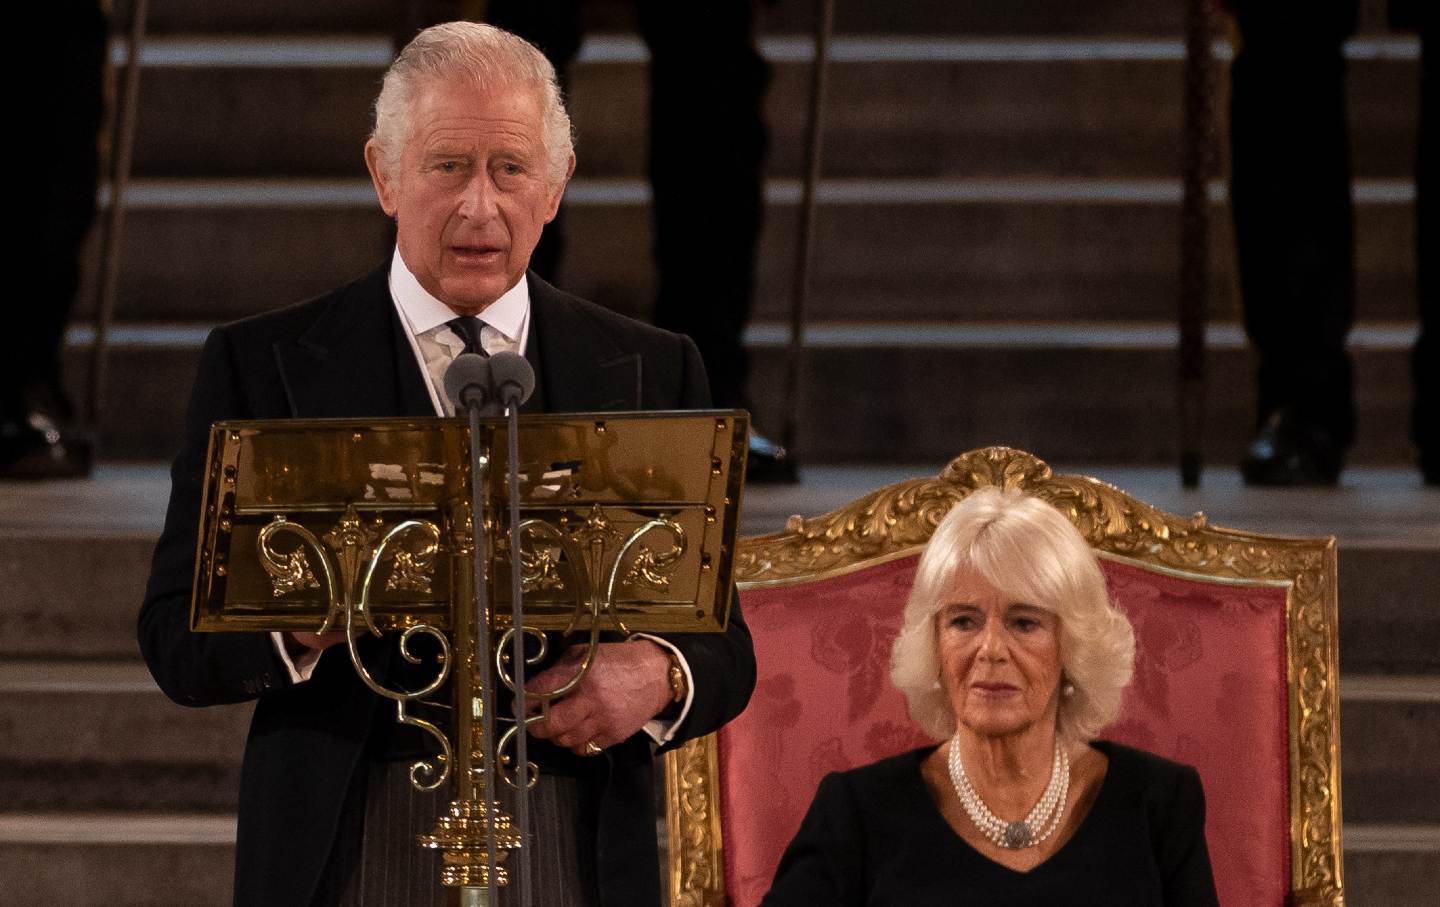 King Charles III speaks as now-Queen Camilla sits beside him at Westminster Hall.